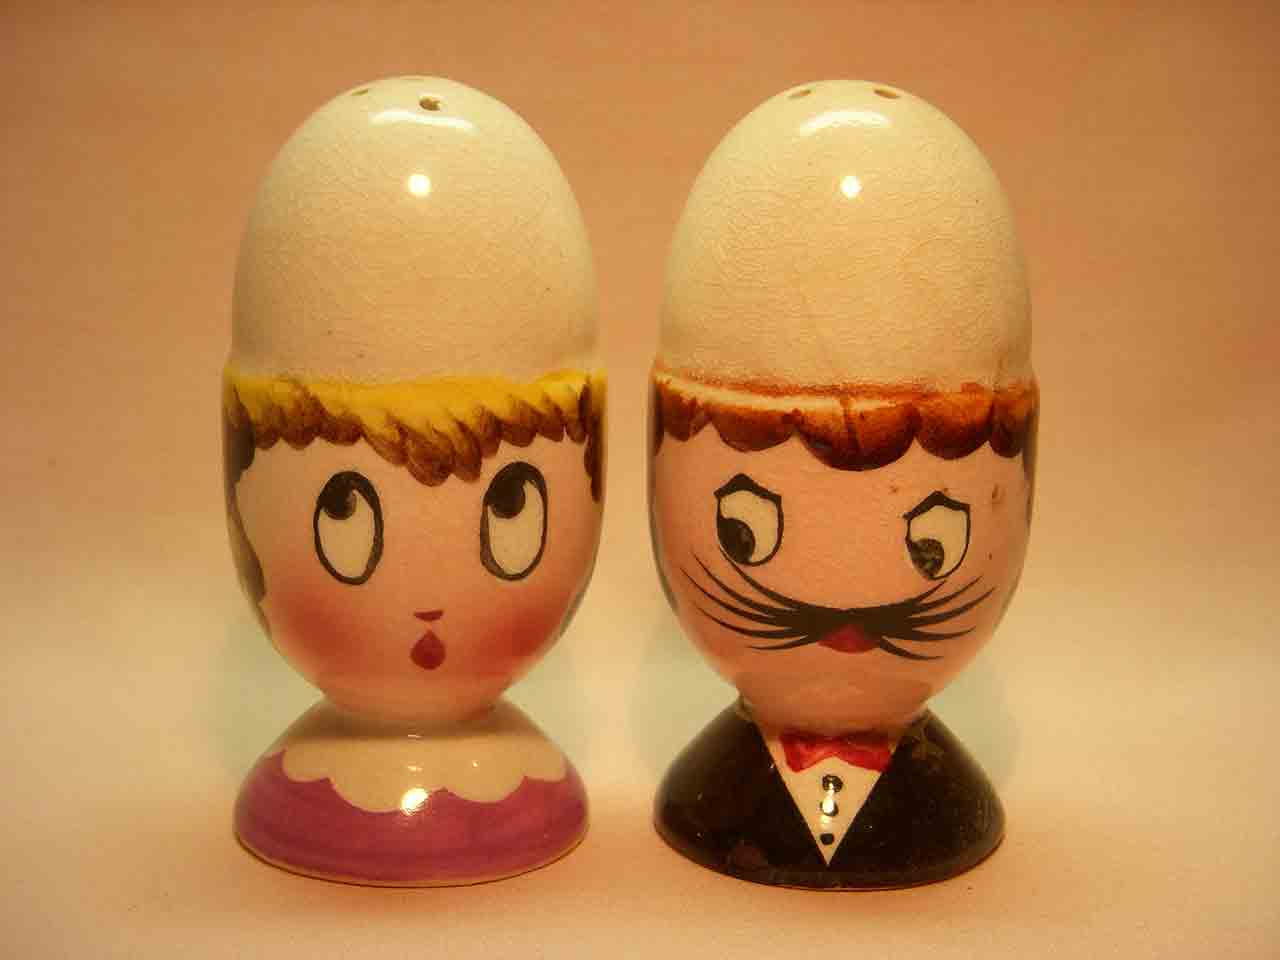 Eggs in egg cup heads salt and pepper shaker